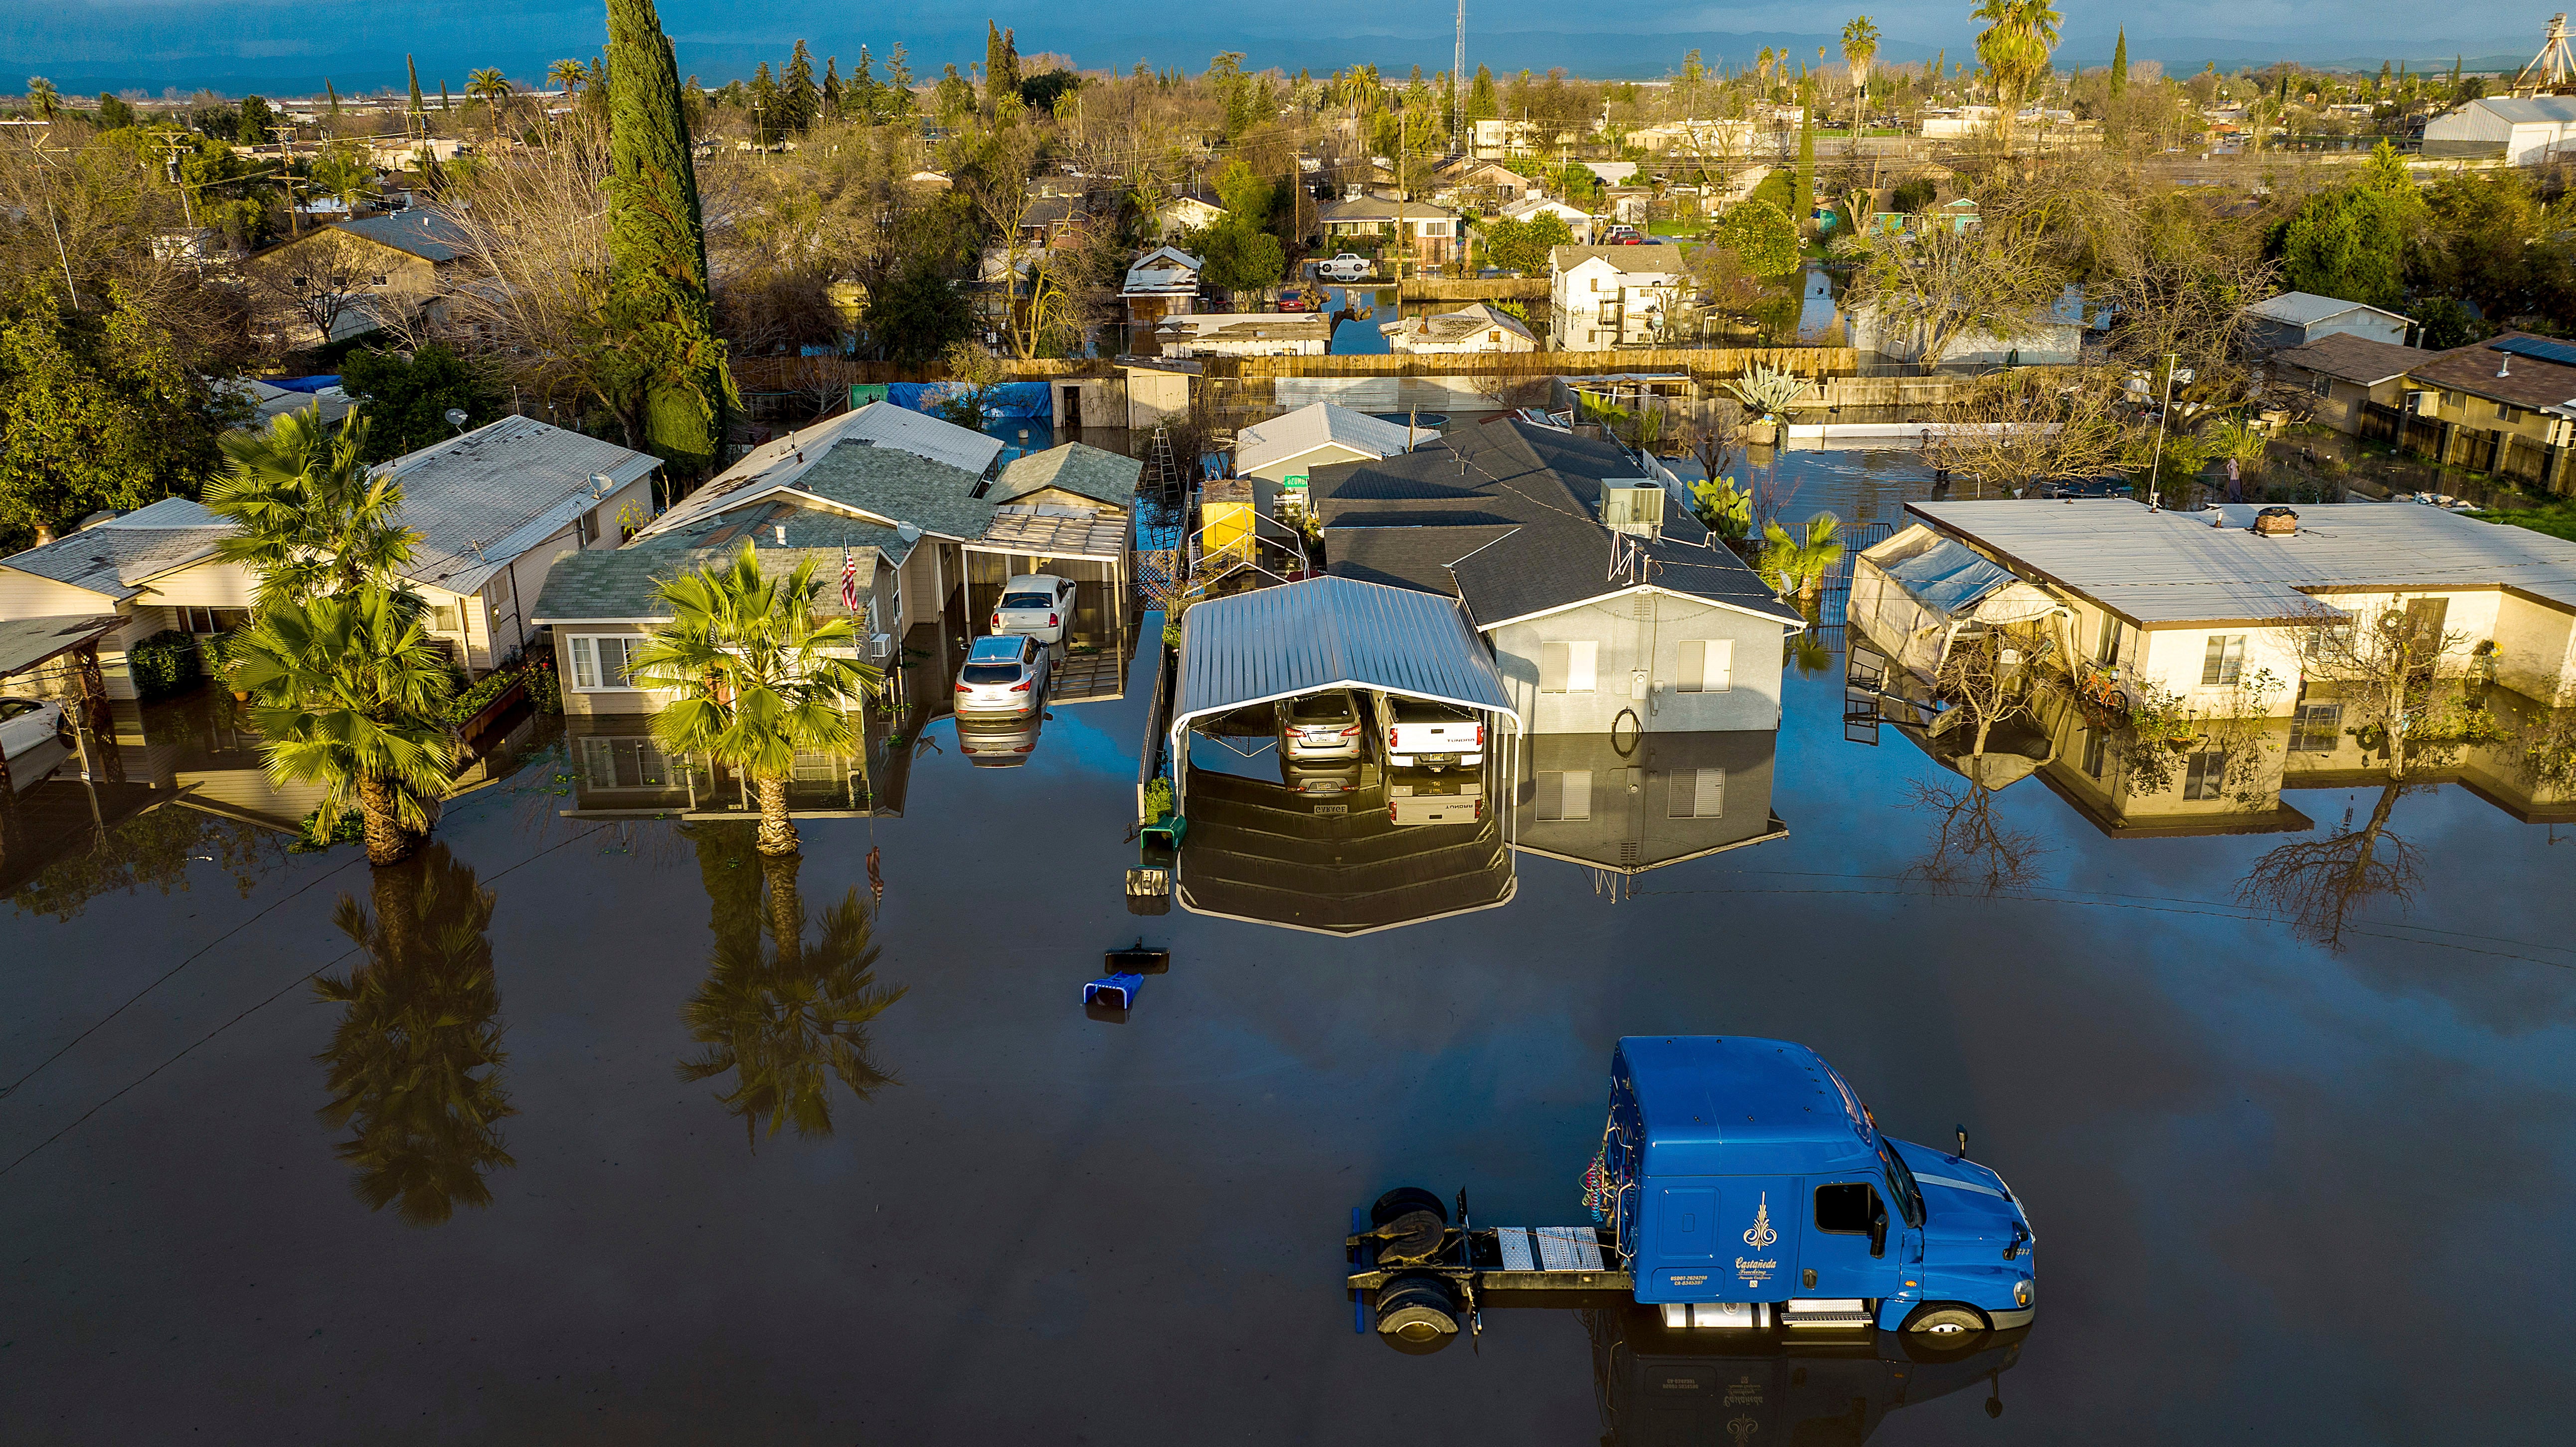 Homes in the Planada community of Merced County on Tuesday, January 10. (Photo: Noah Berger, AP)